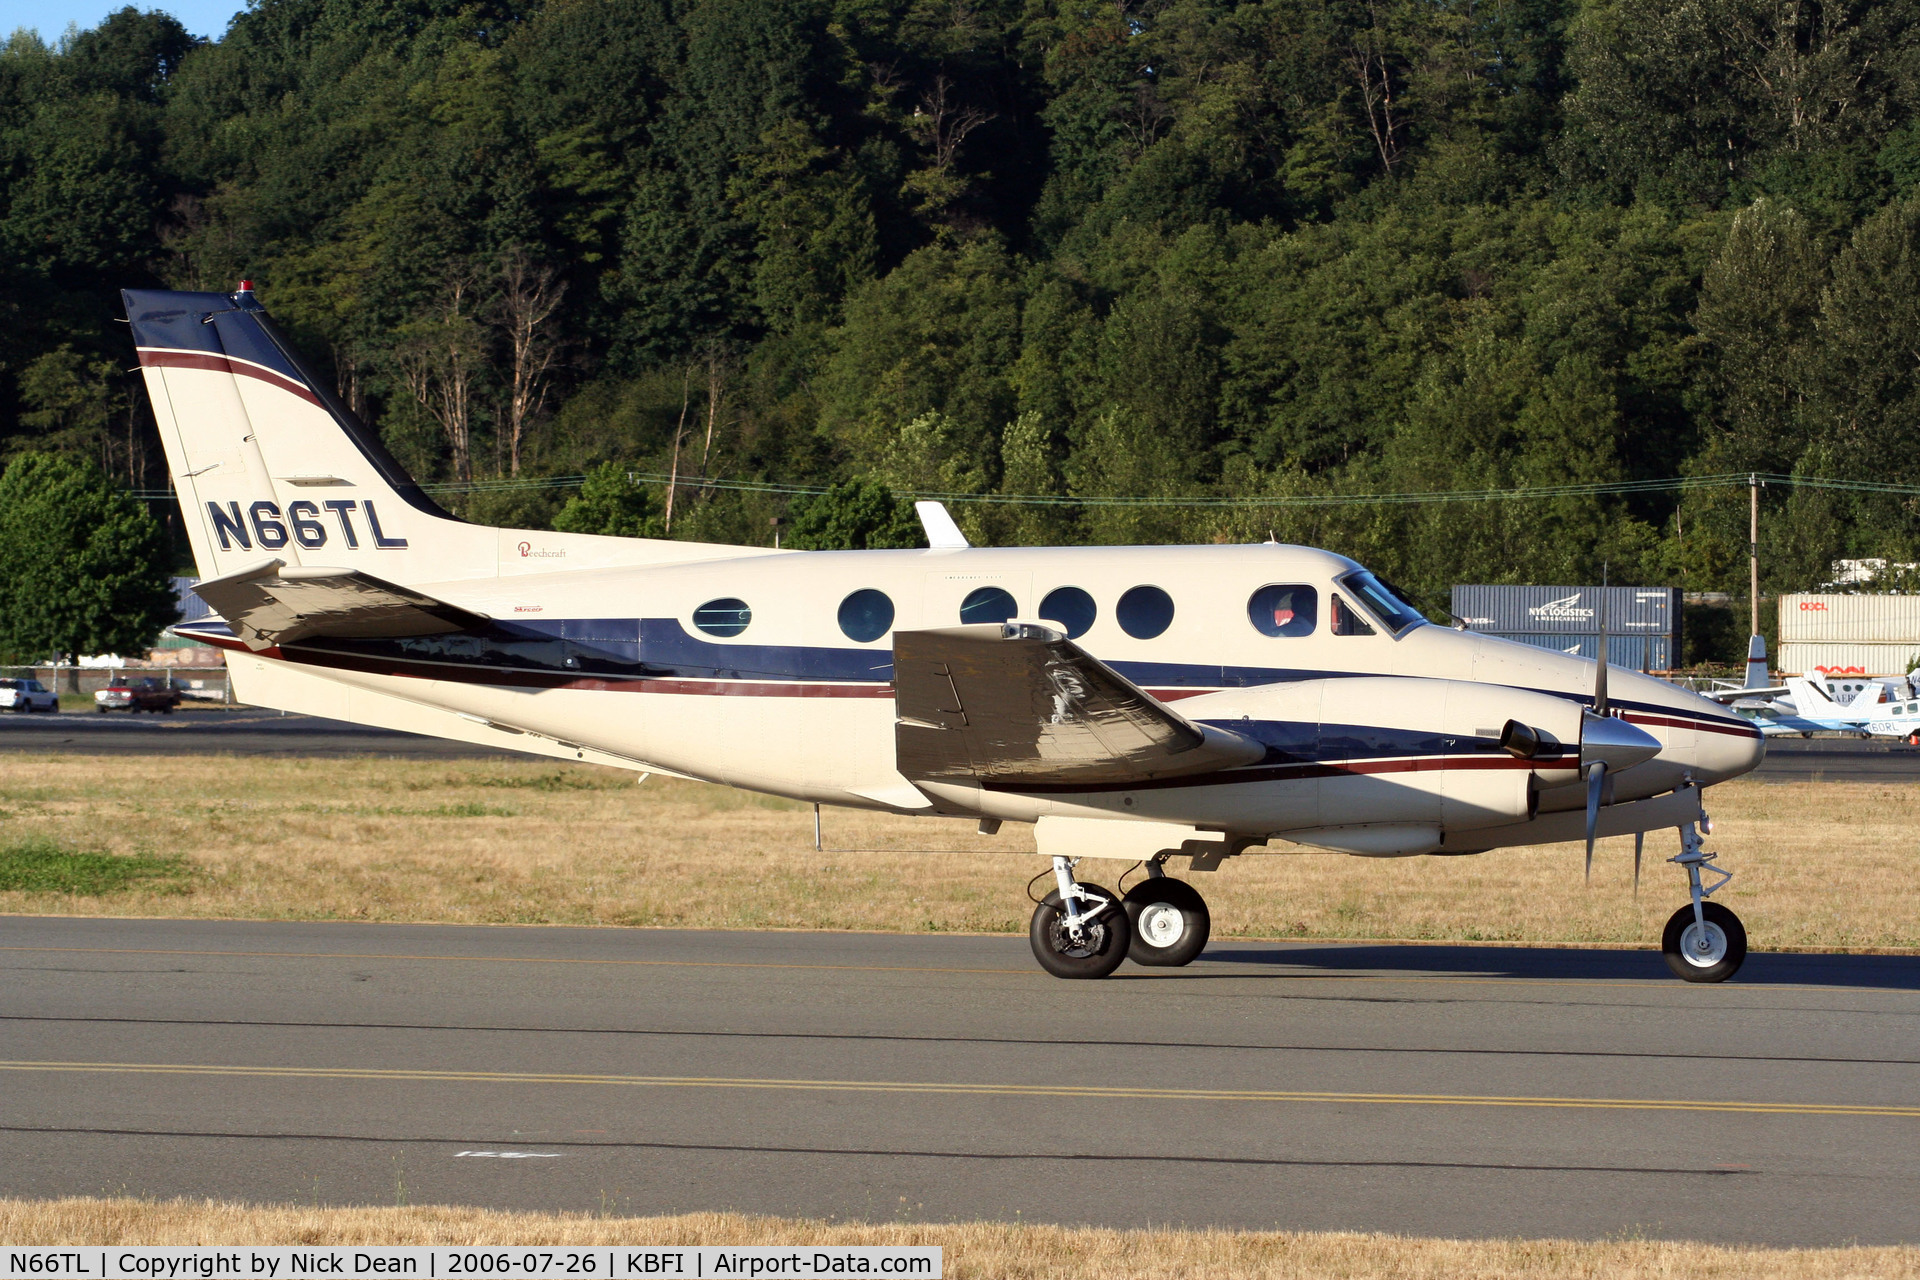 N66TL, 1974 Beech C90 King Air C/N LJ-636, Another of the many King Airs being uploaded